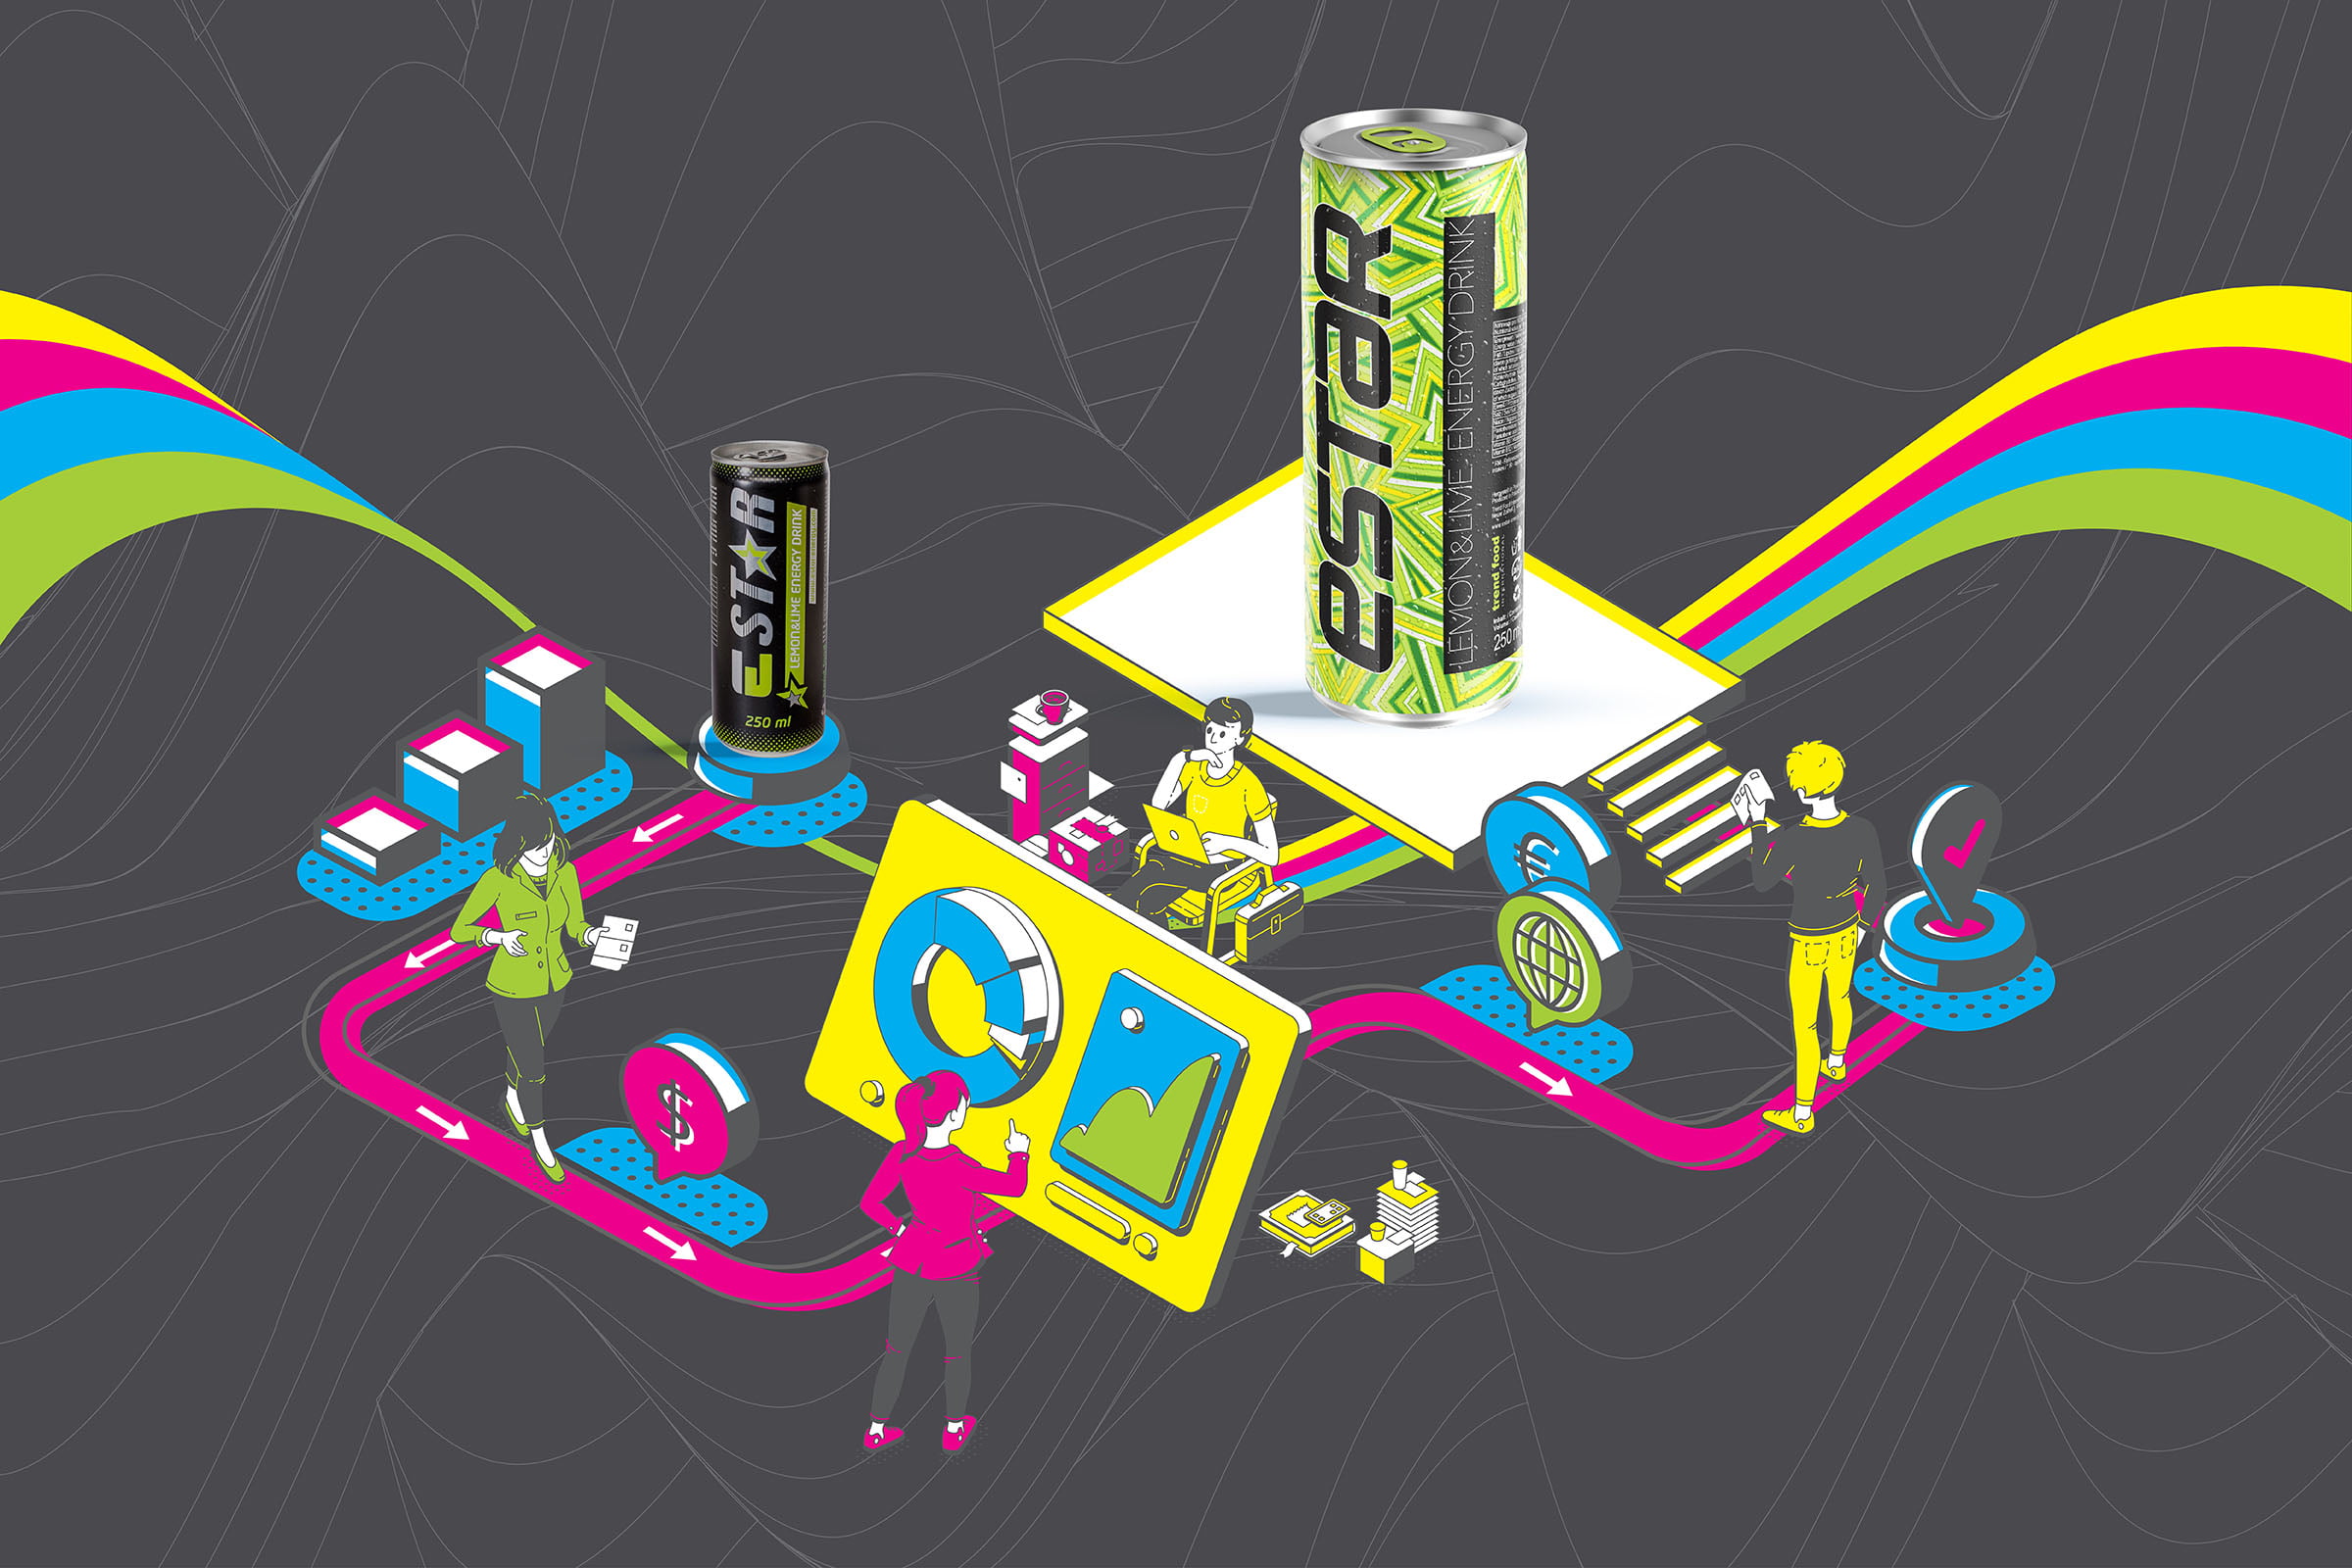 Brand Localization in Iran for an Energy Drink Company: Initial Step of a Marketing Plan